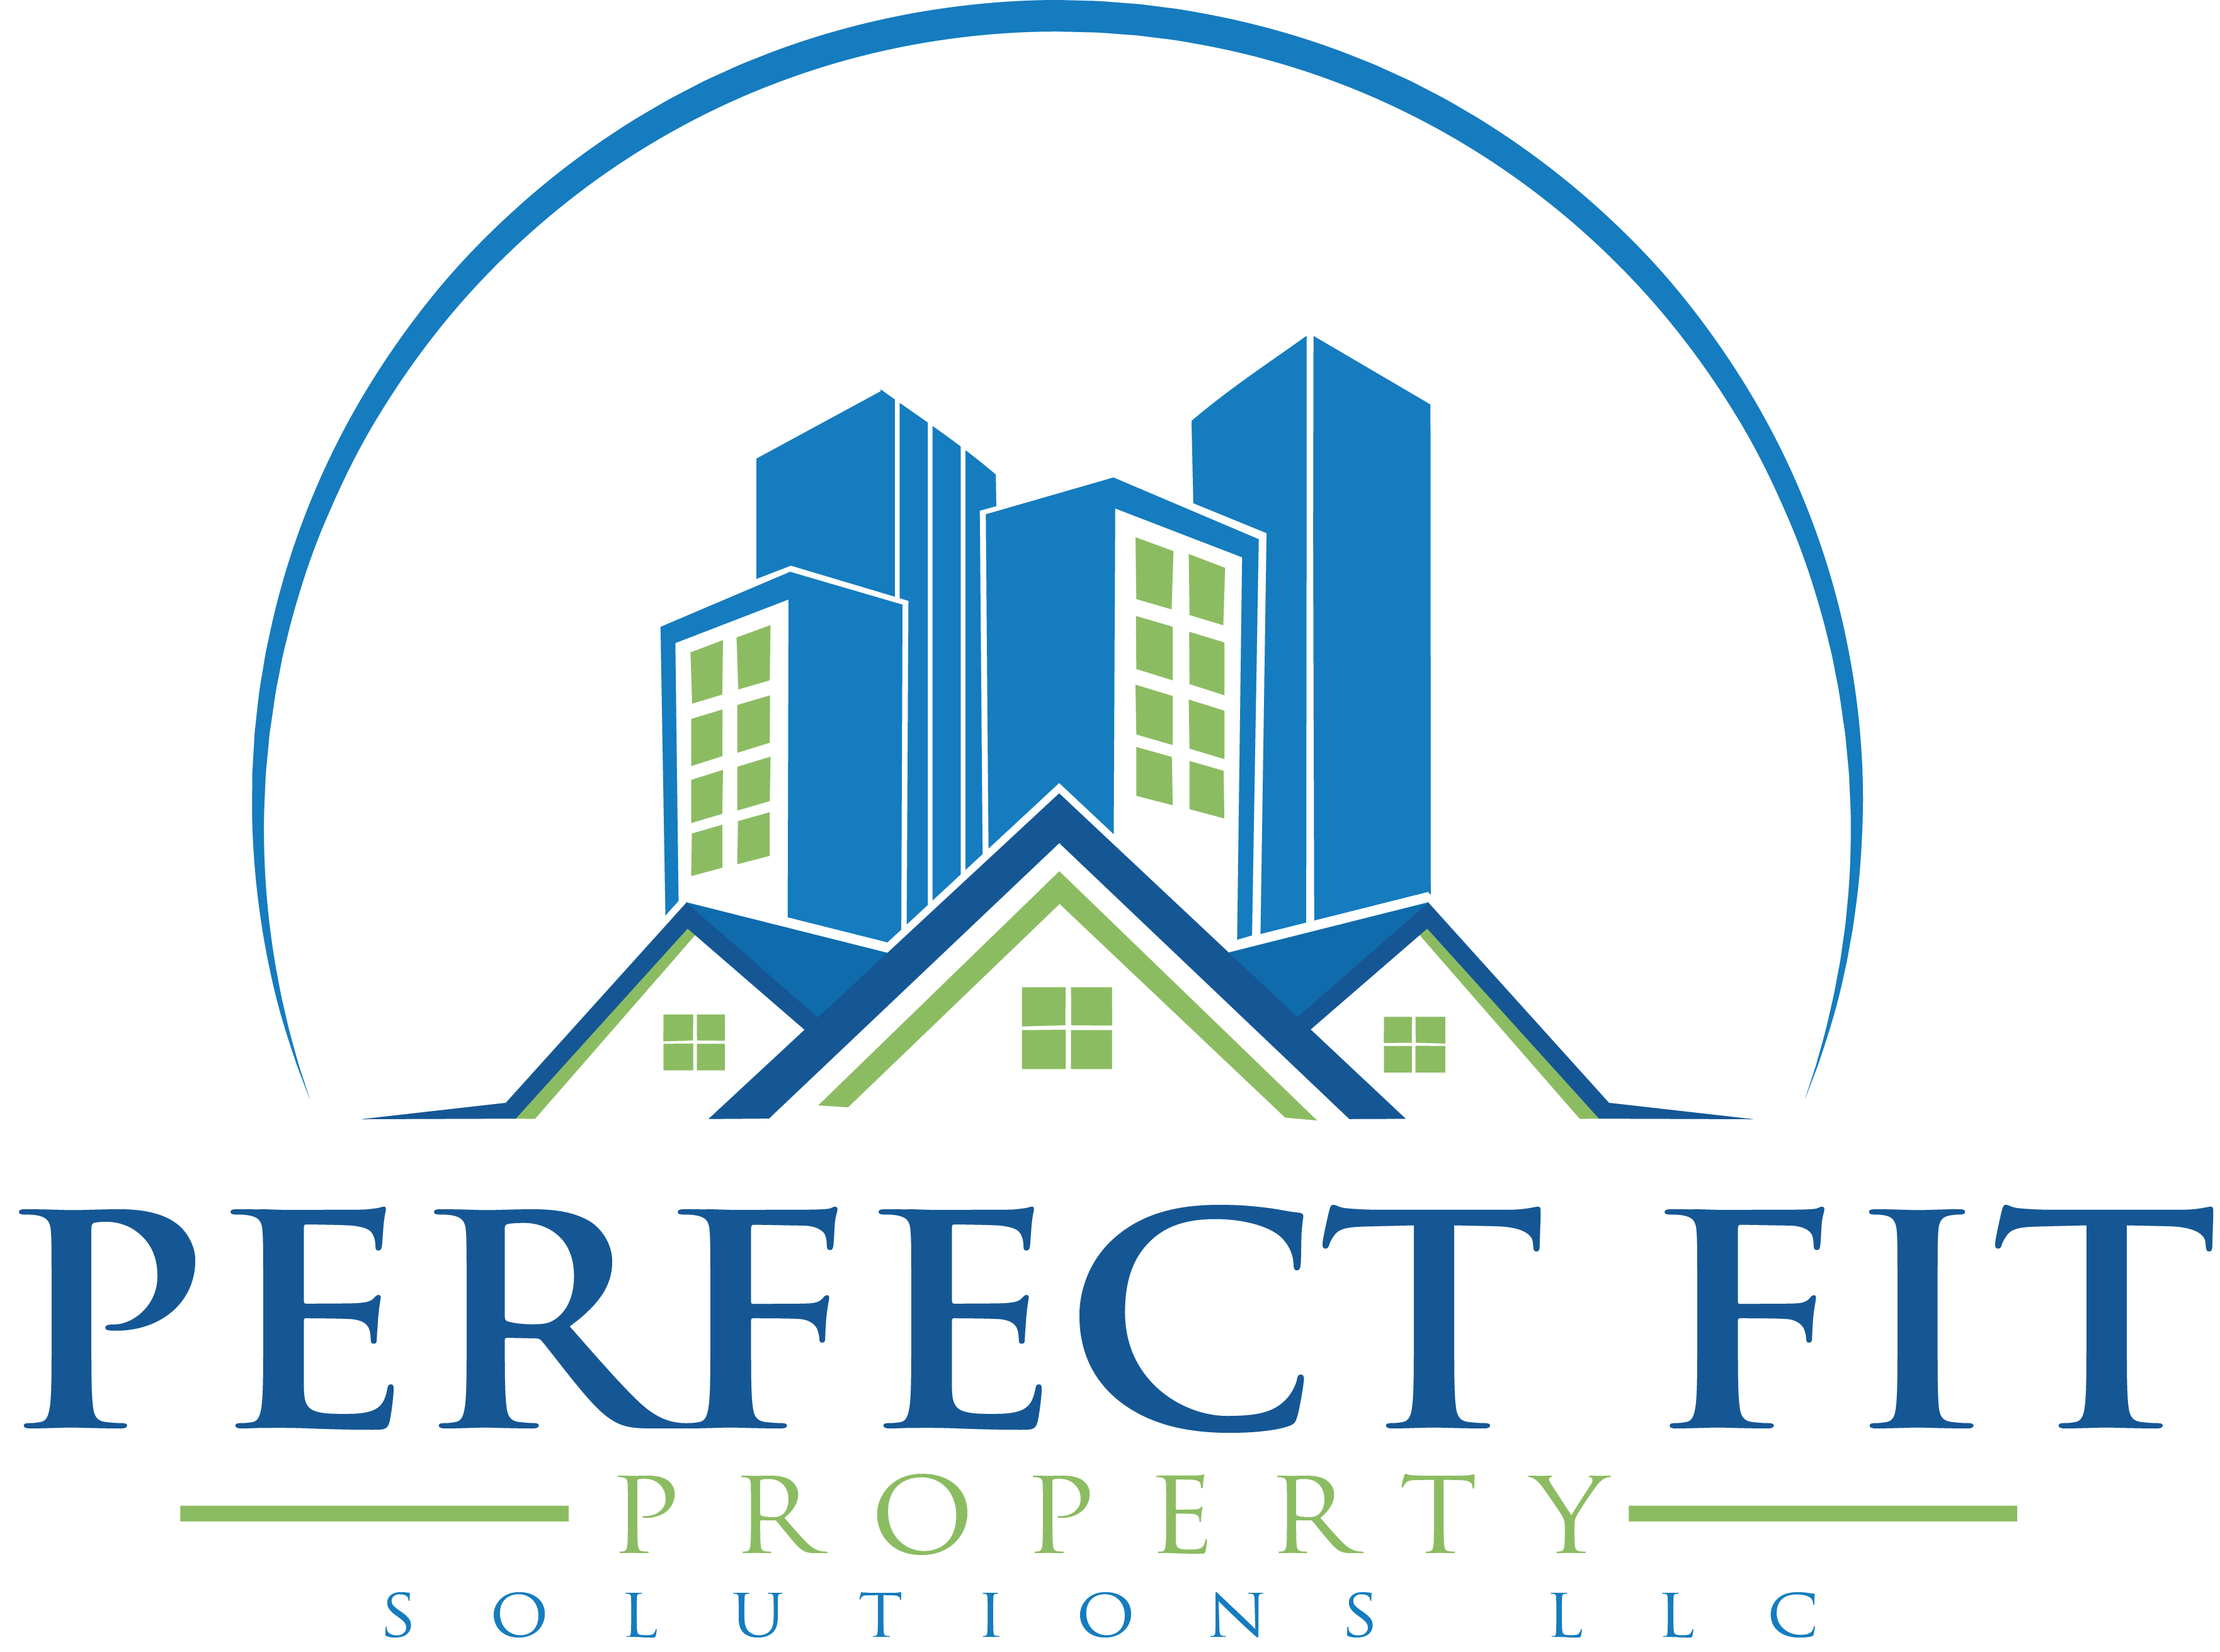 Perfect Fit Property Solutions